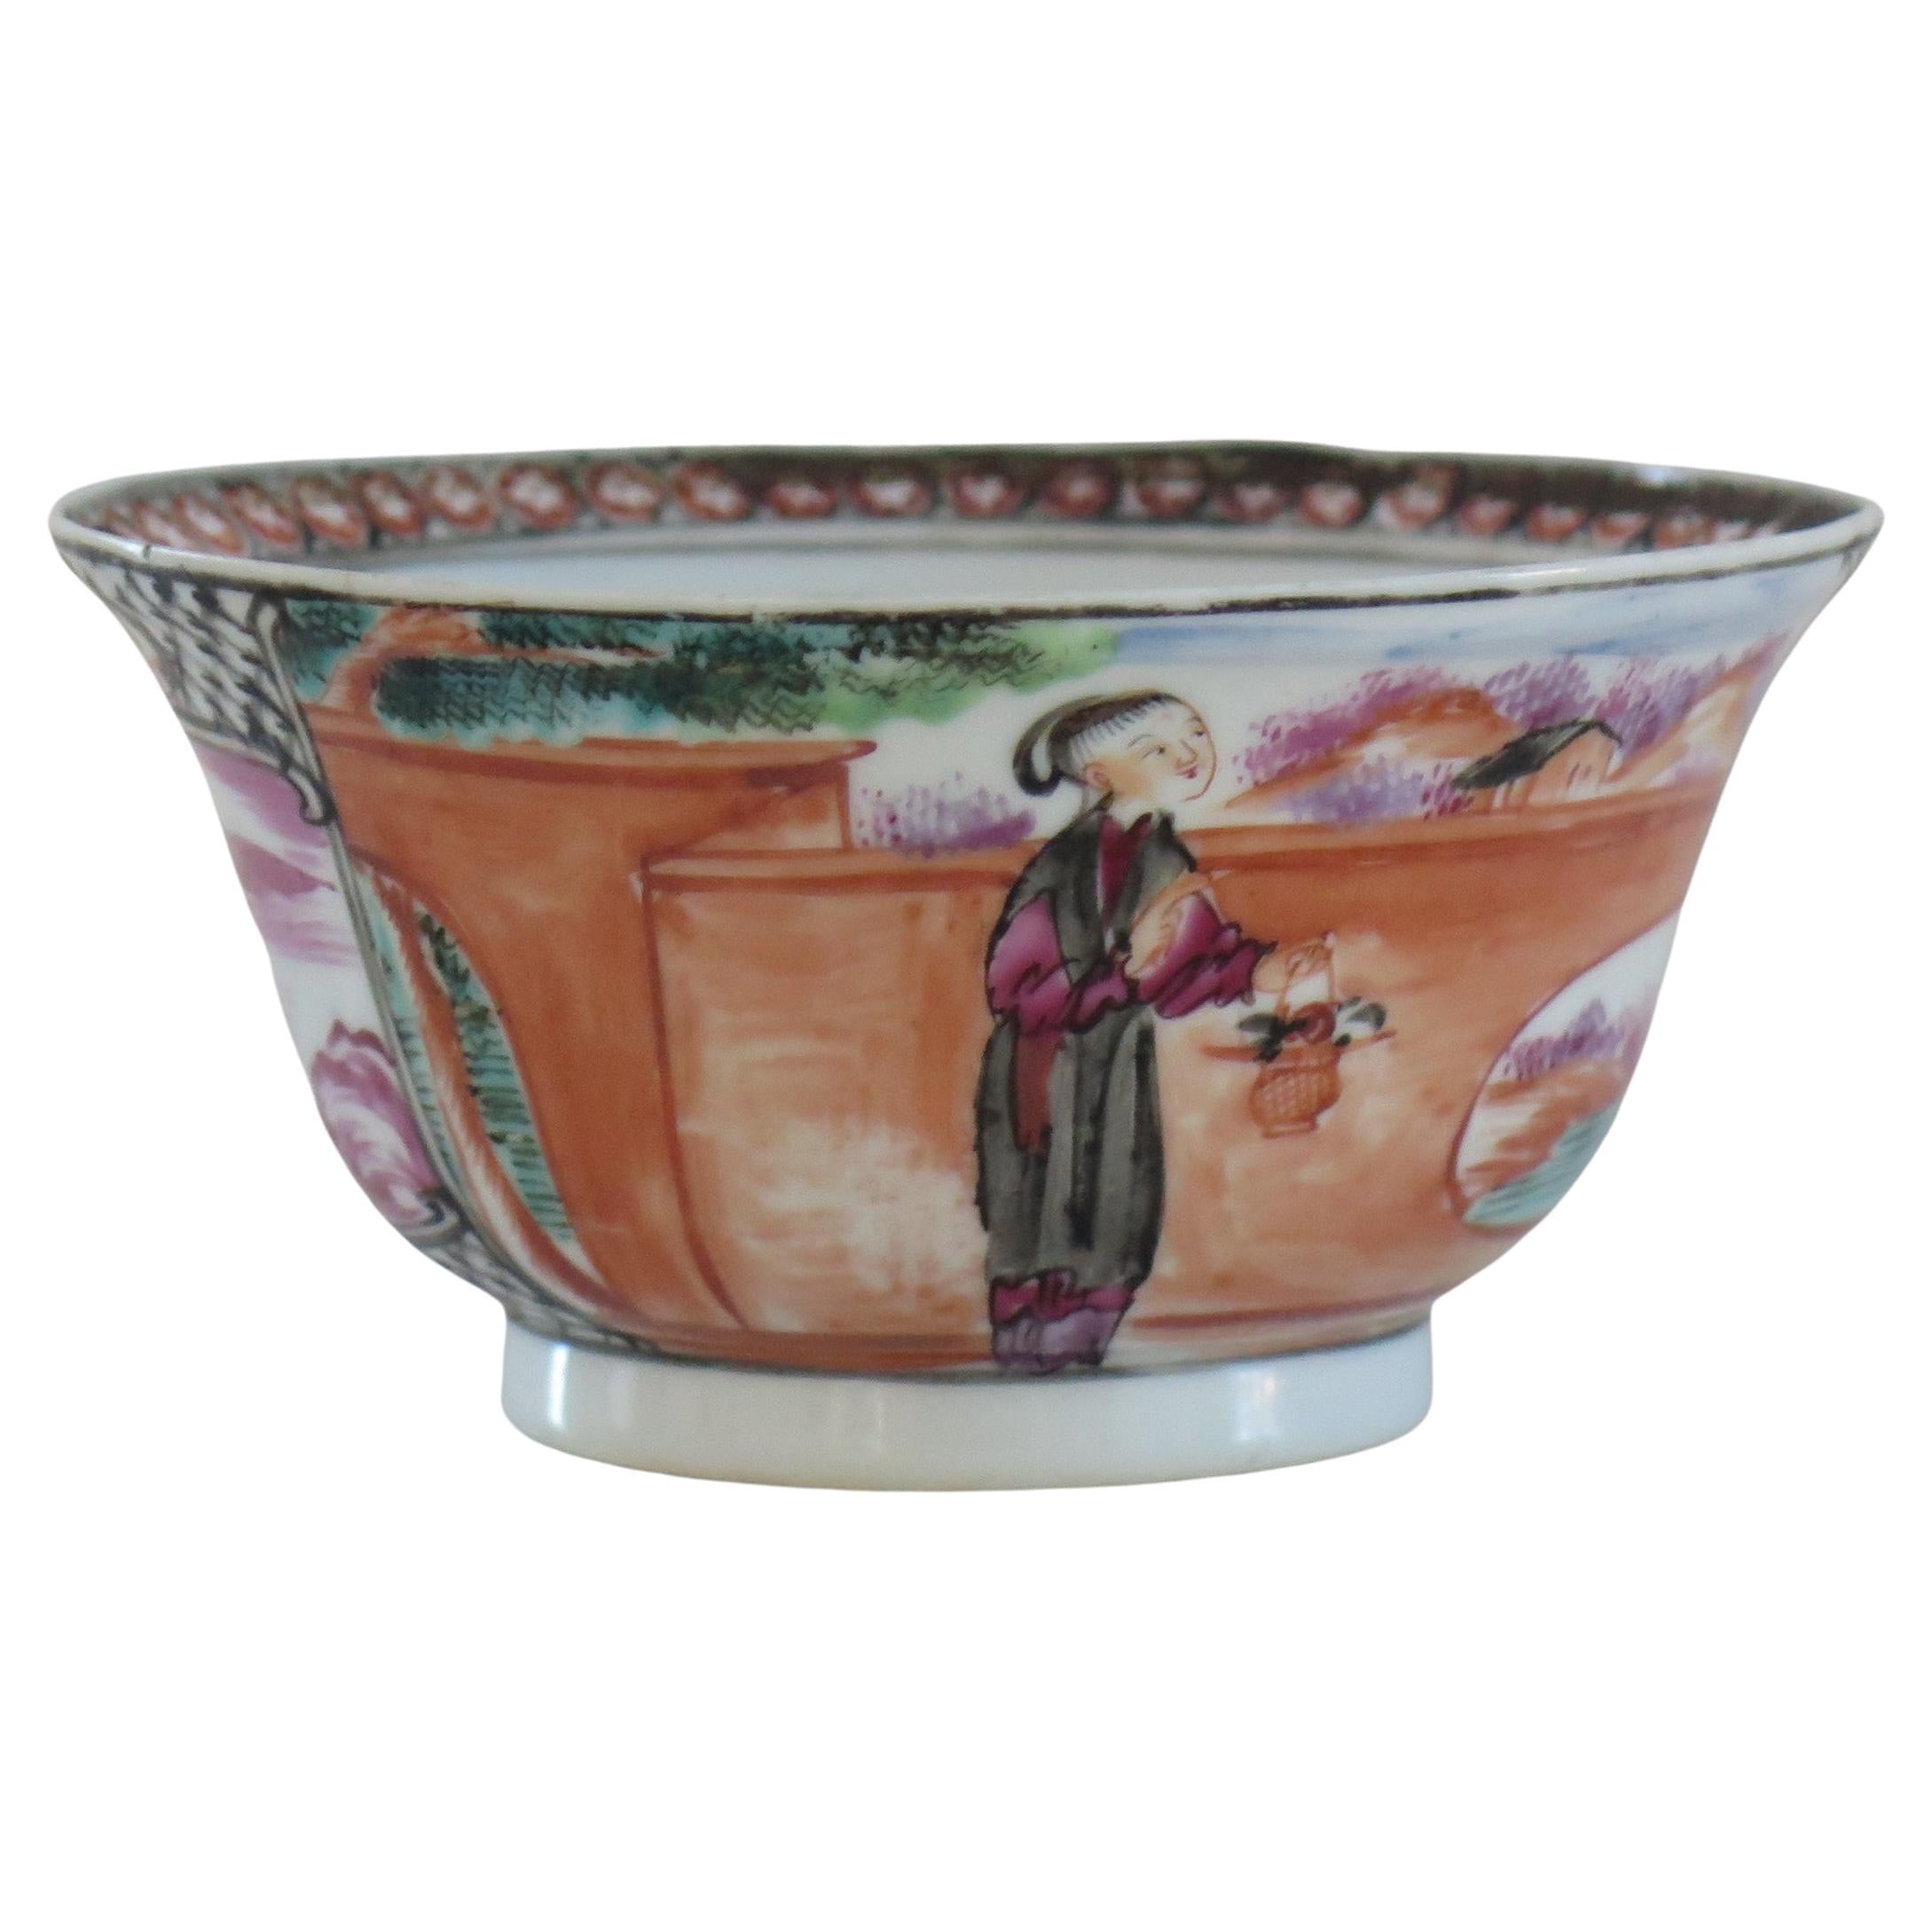 This is a finely hand painted Chinese porcelain bowl from the 18th century, Qing dynasty, Qianlong period, 1736-1795.

The bowl is beautifully decorated with two panels of figure scenes alternating with two magenta border panels. The figural